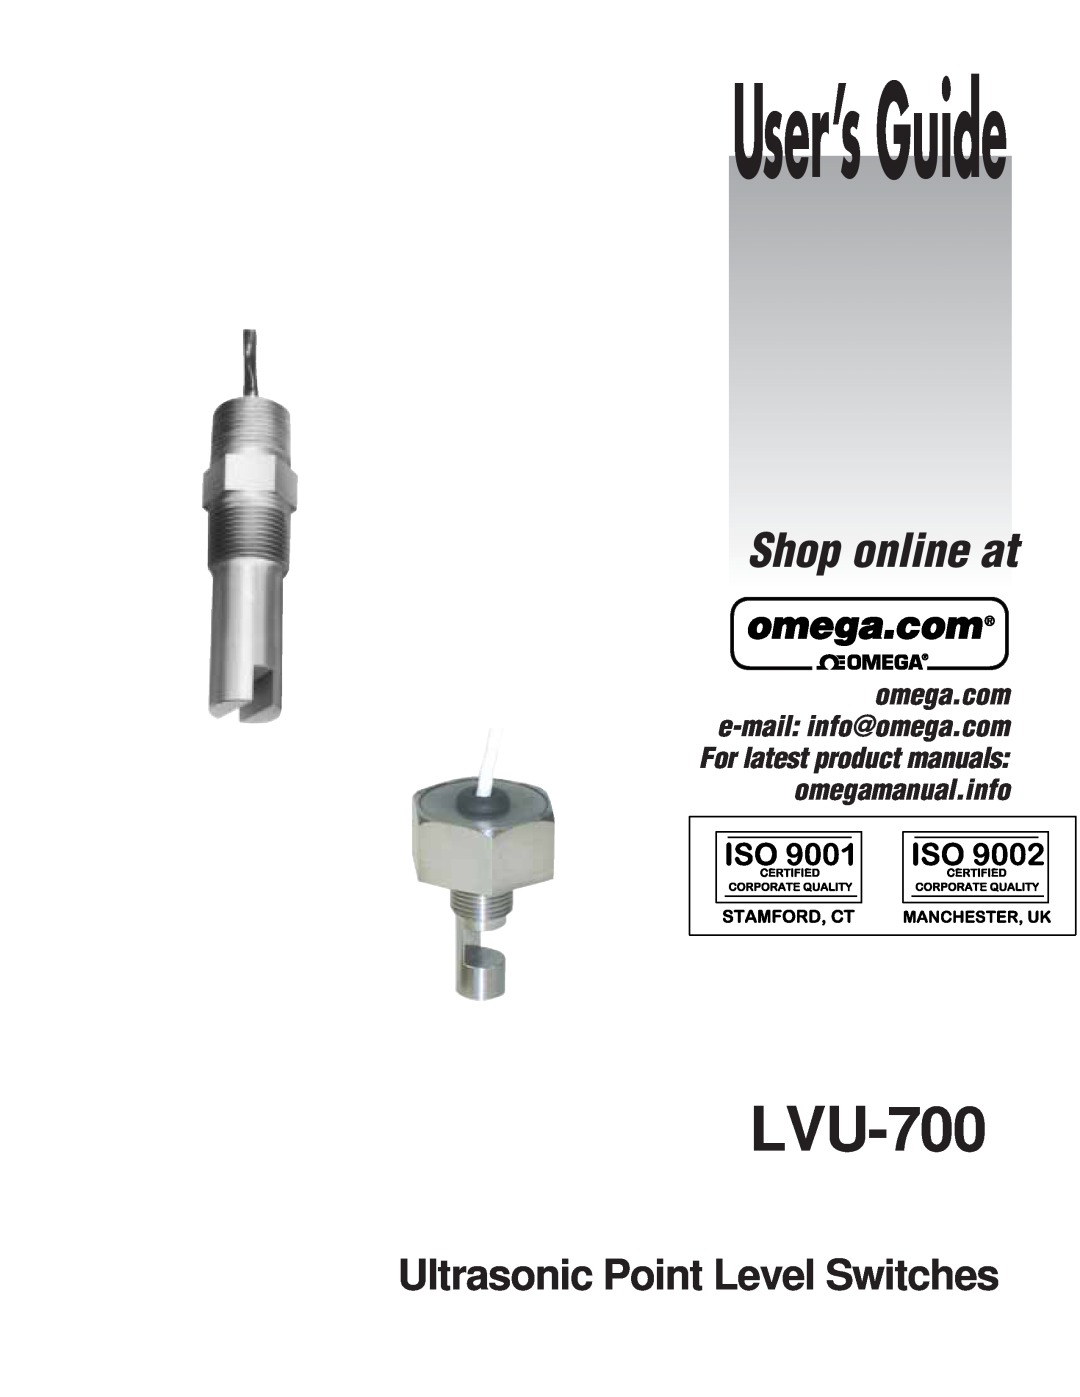 Omega Engineering LVU-700 manual User’s Guide, Shop online at, Ultrasonic Point Level Switches 